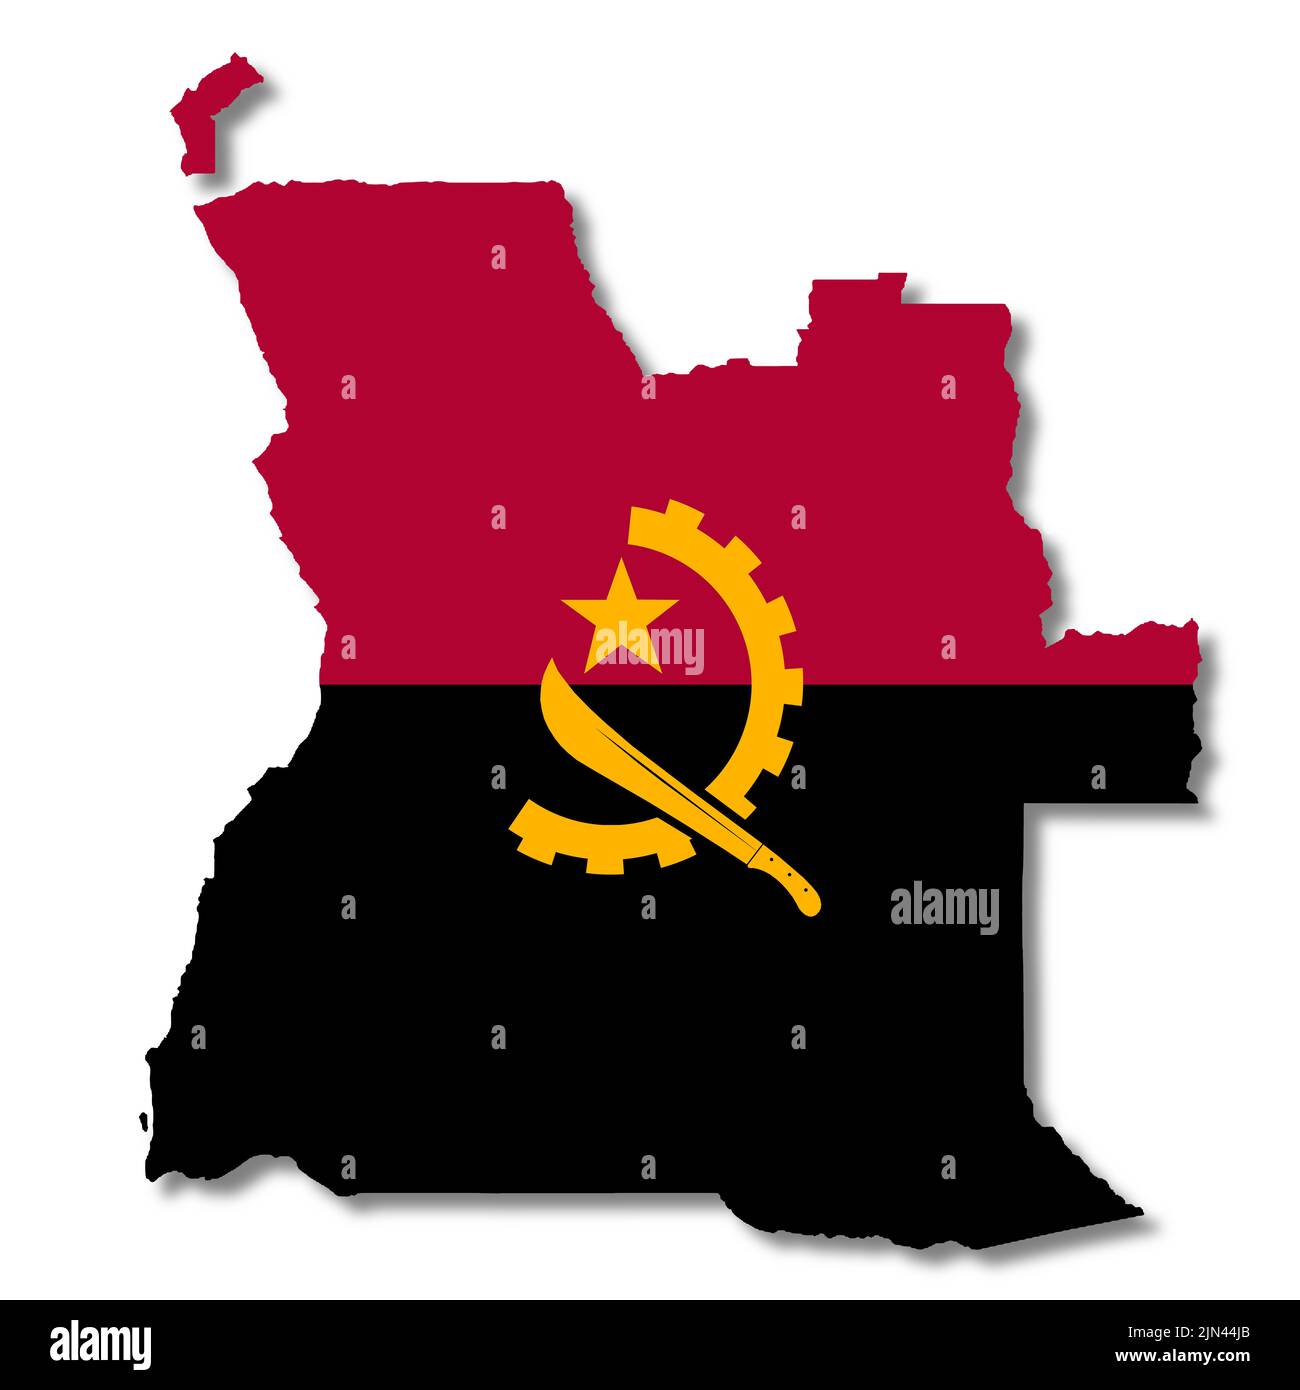 Angola flag map on white background 3d illustration with clipping path Stock Photo